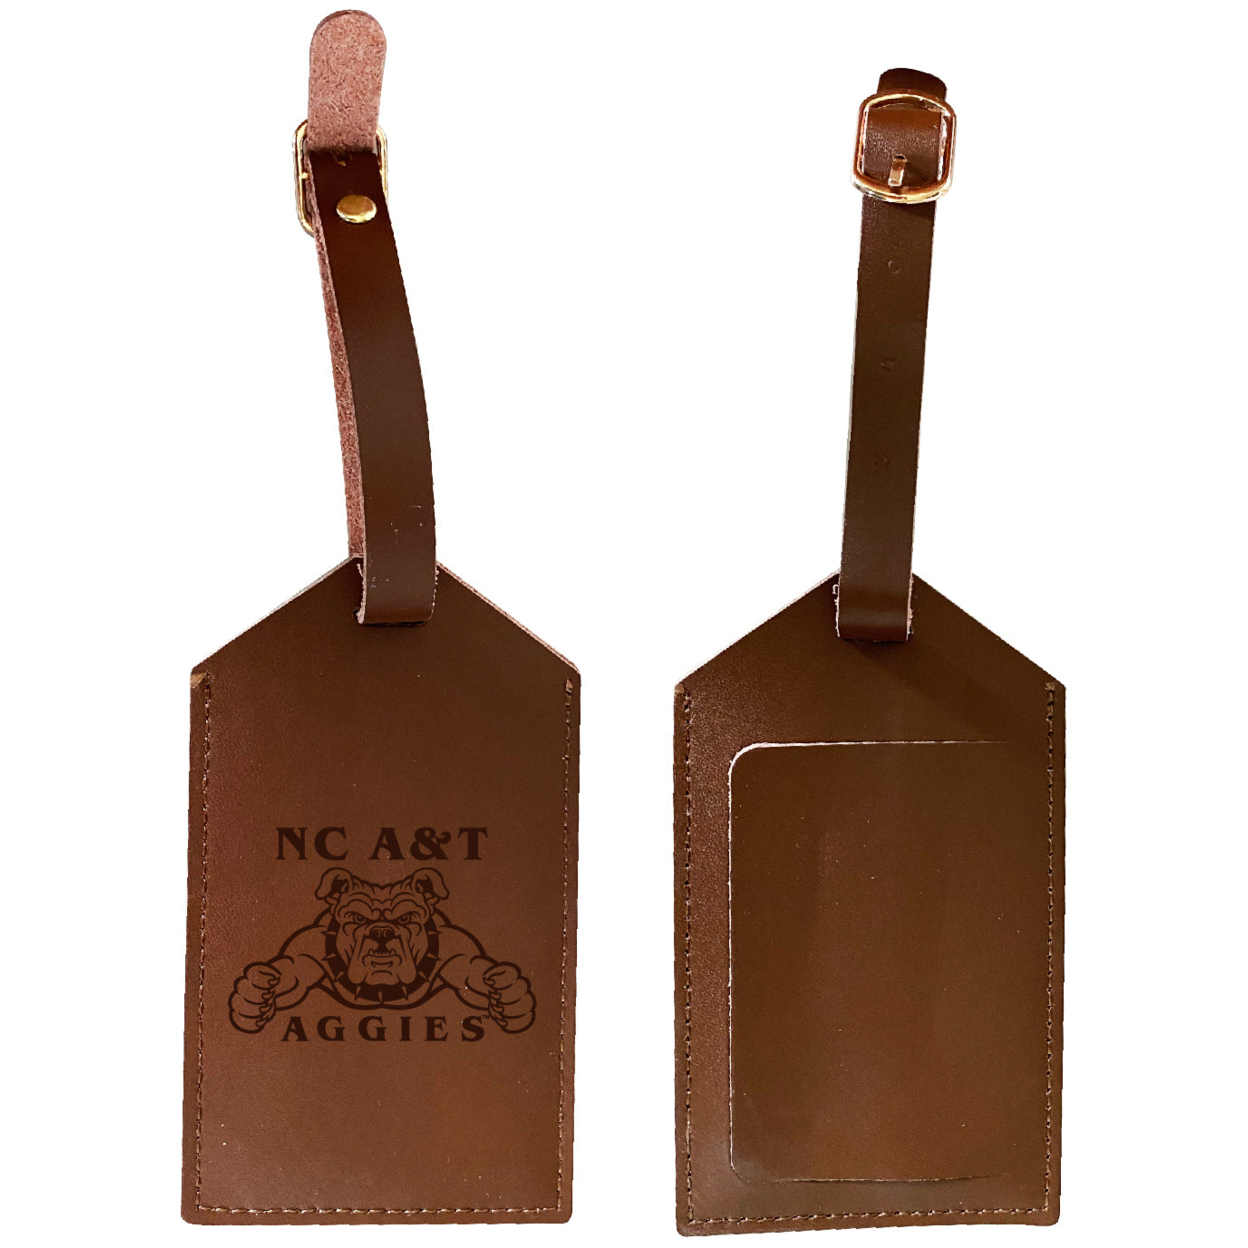 North Carolina A&T State Aggies Leather Luggage Tag Engraved